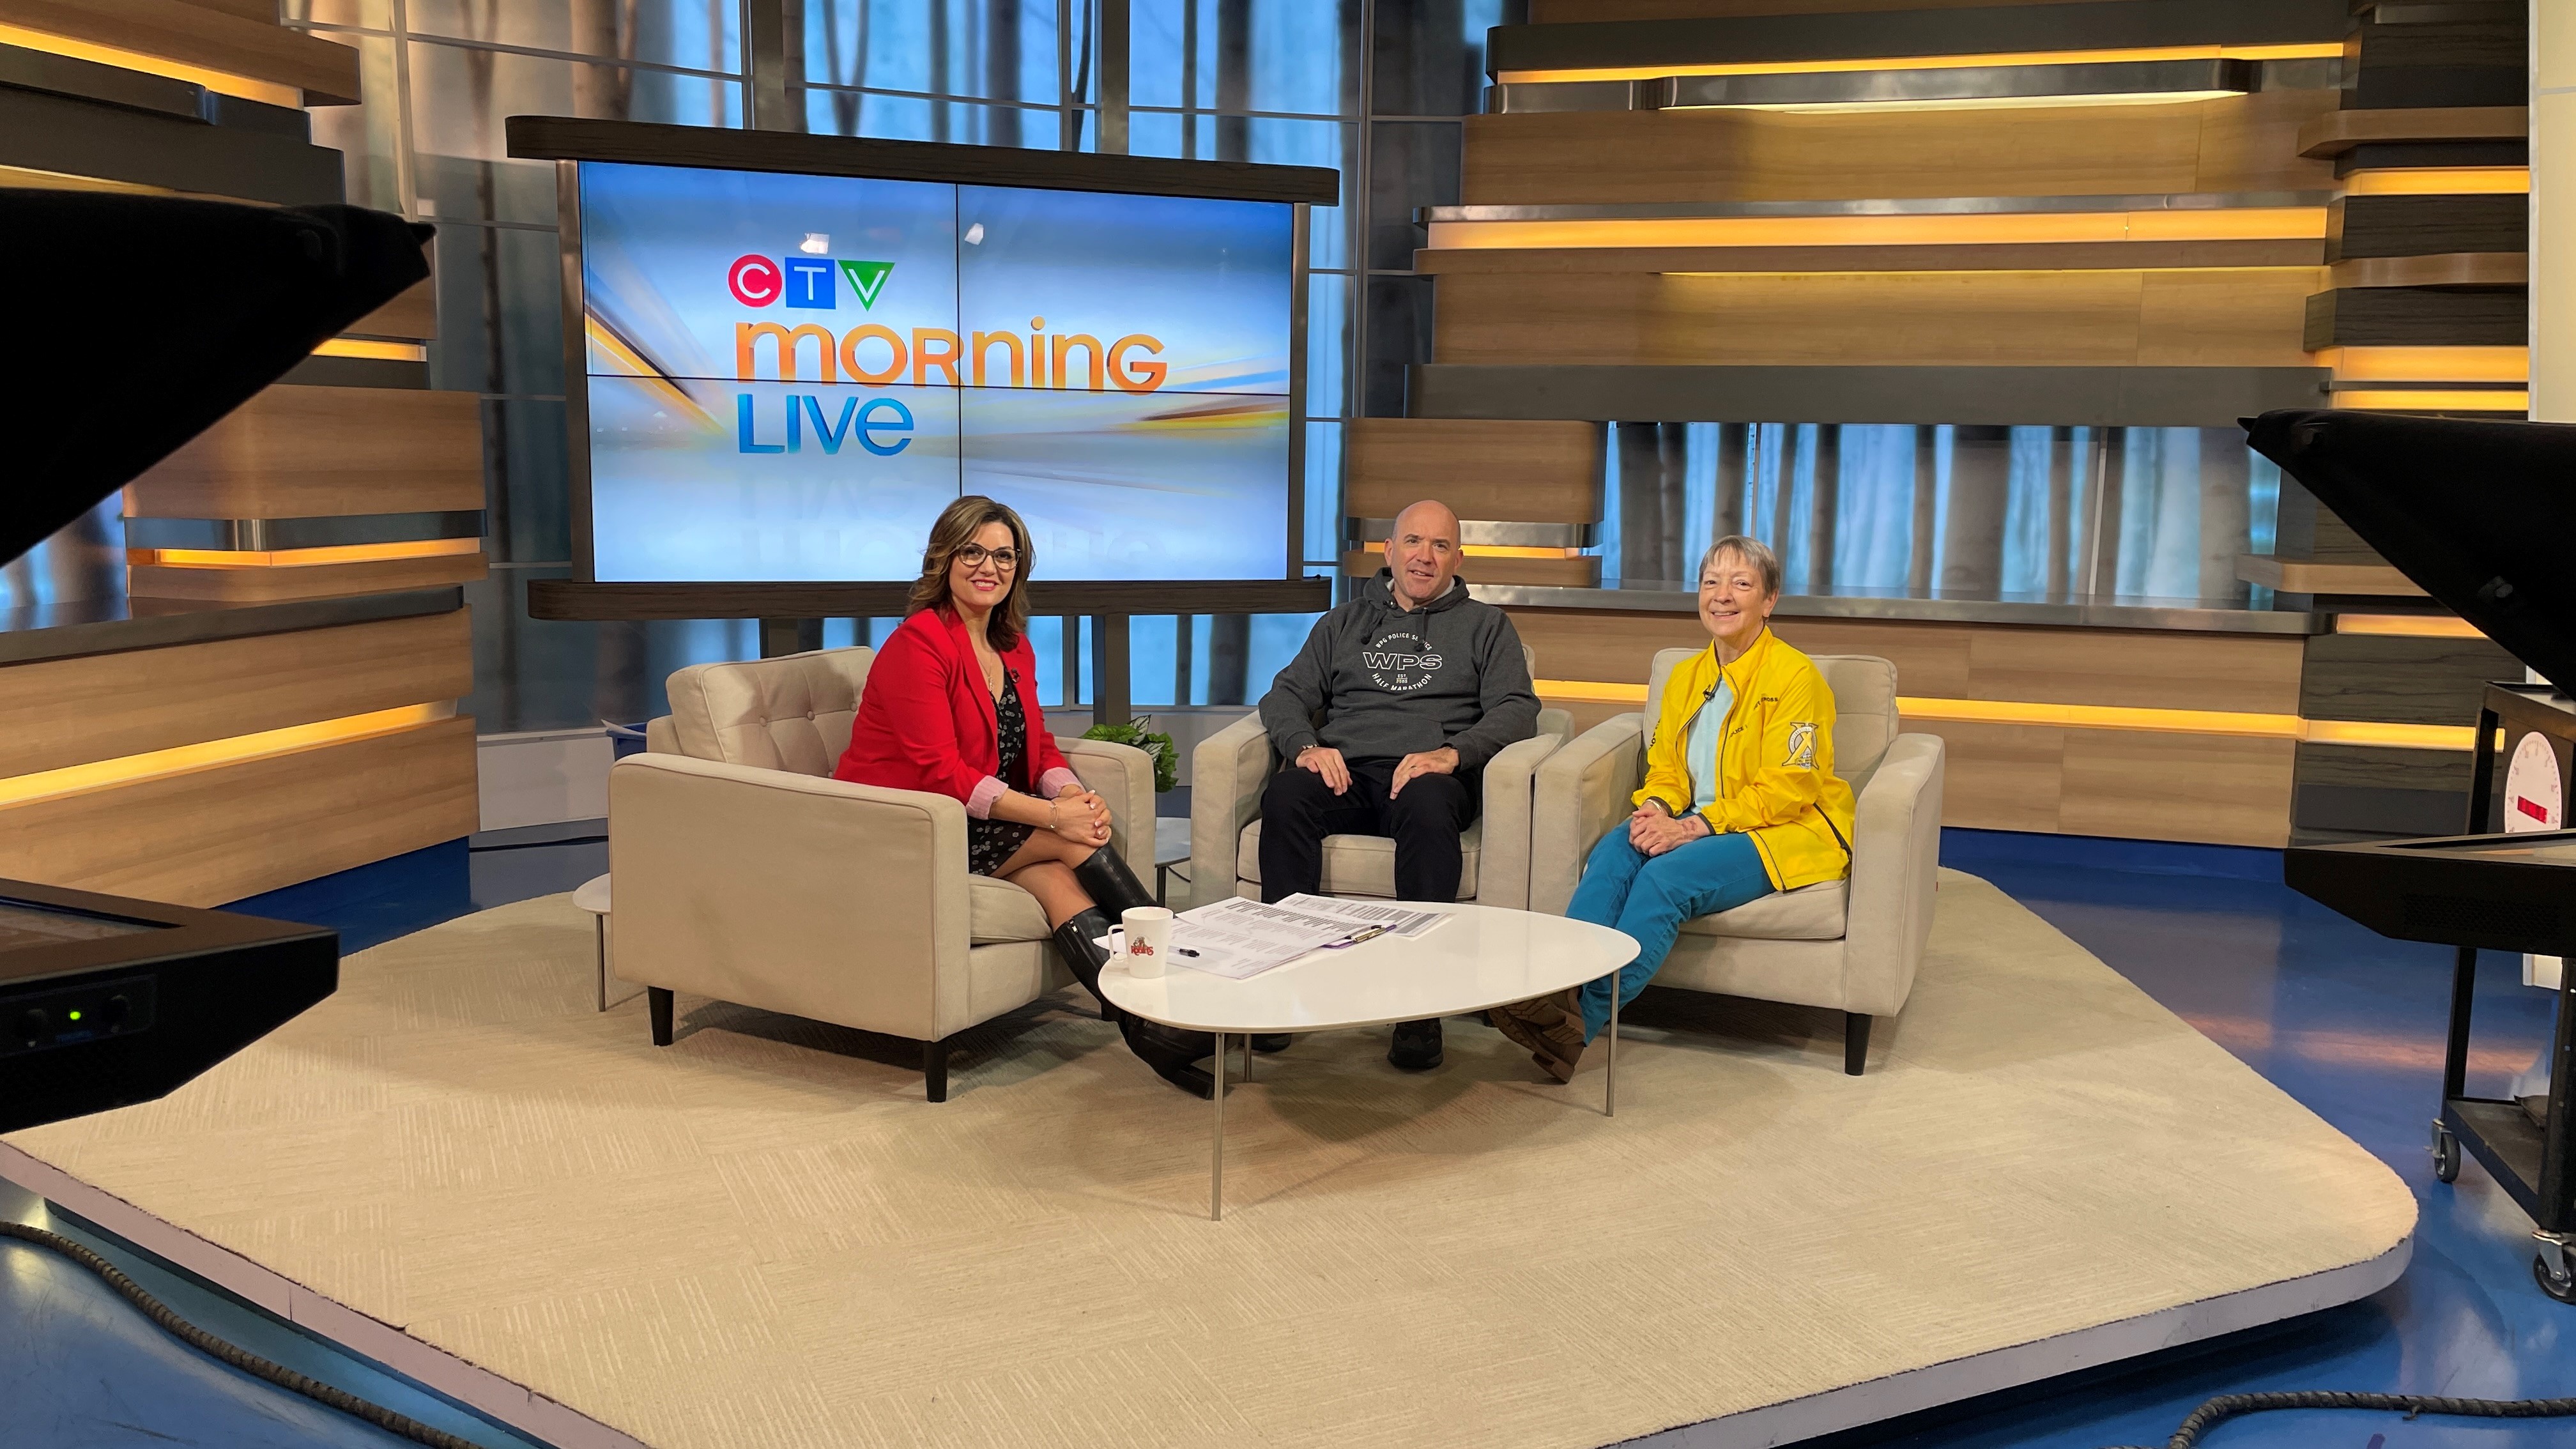 Race Director Nick Paulet, who also serves as the Divisional Commander of East District and volunteer Annette Eibner were on CTV Morning Live March 5th talking about the race,its origins and the cause. 